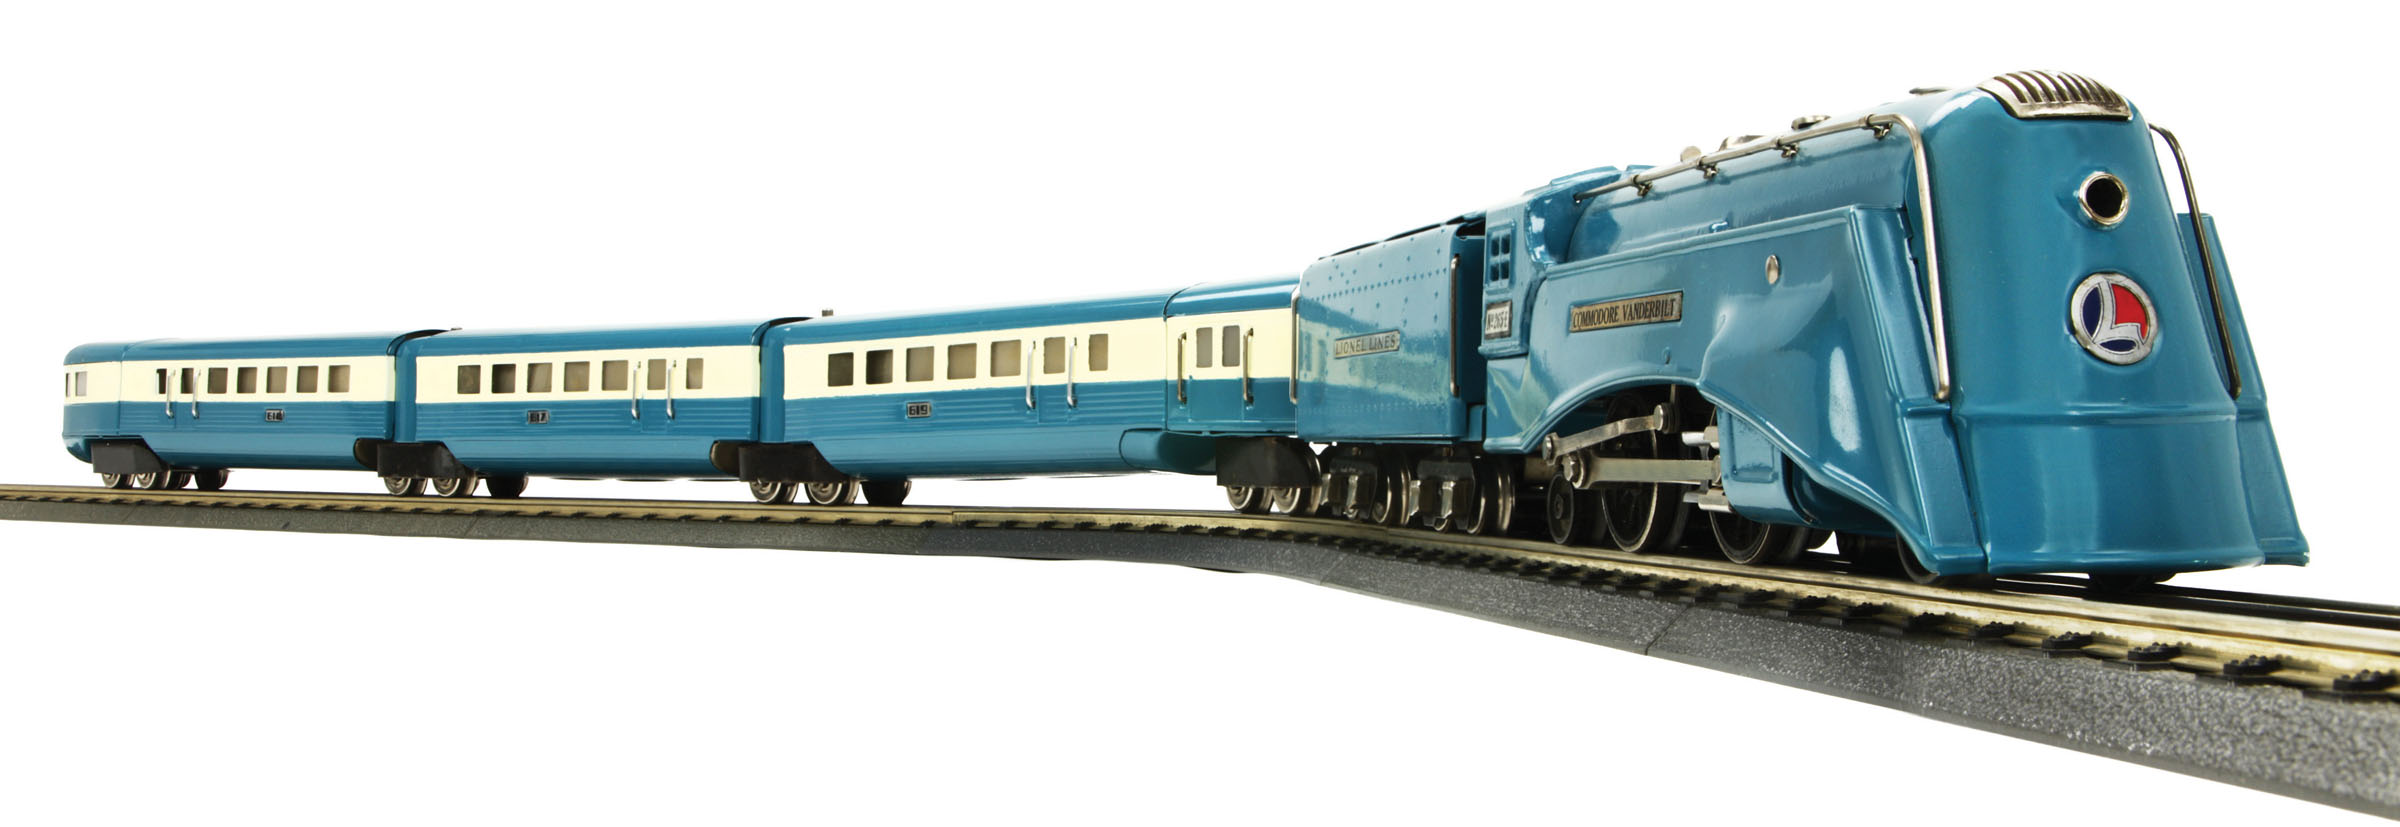 11-6016-1 | MTH ELECTRIC TRAINS